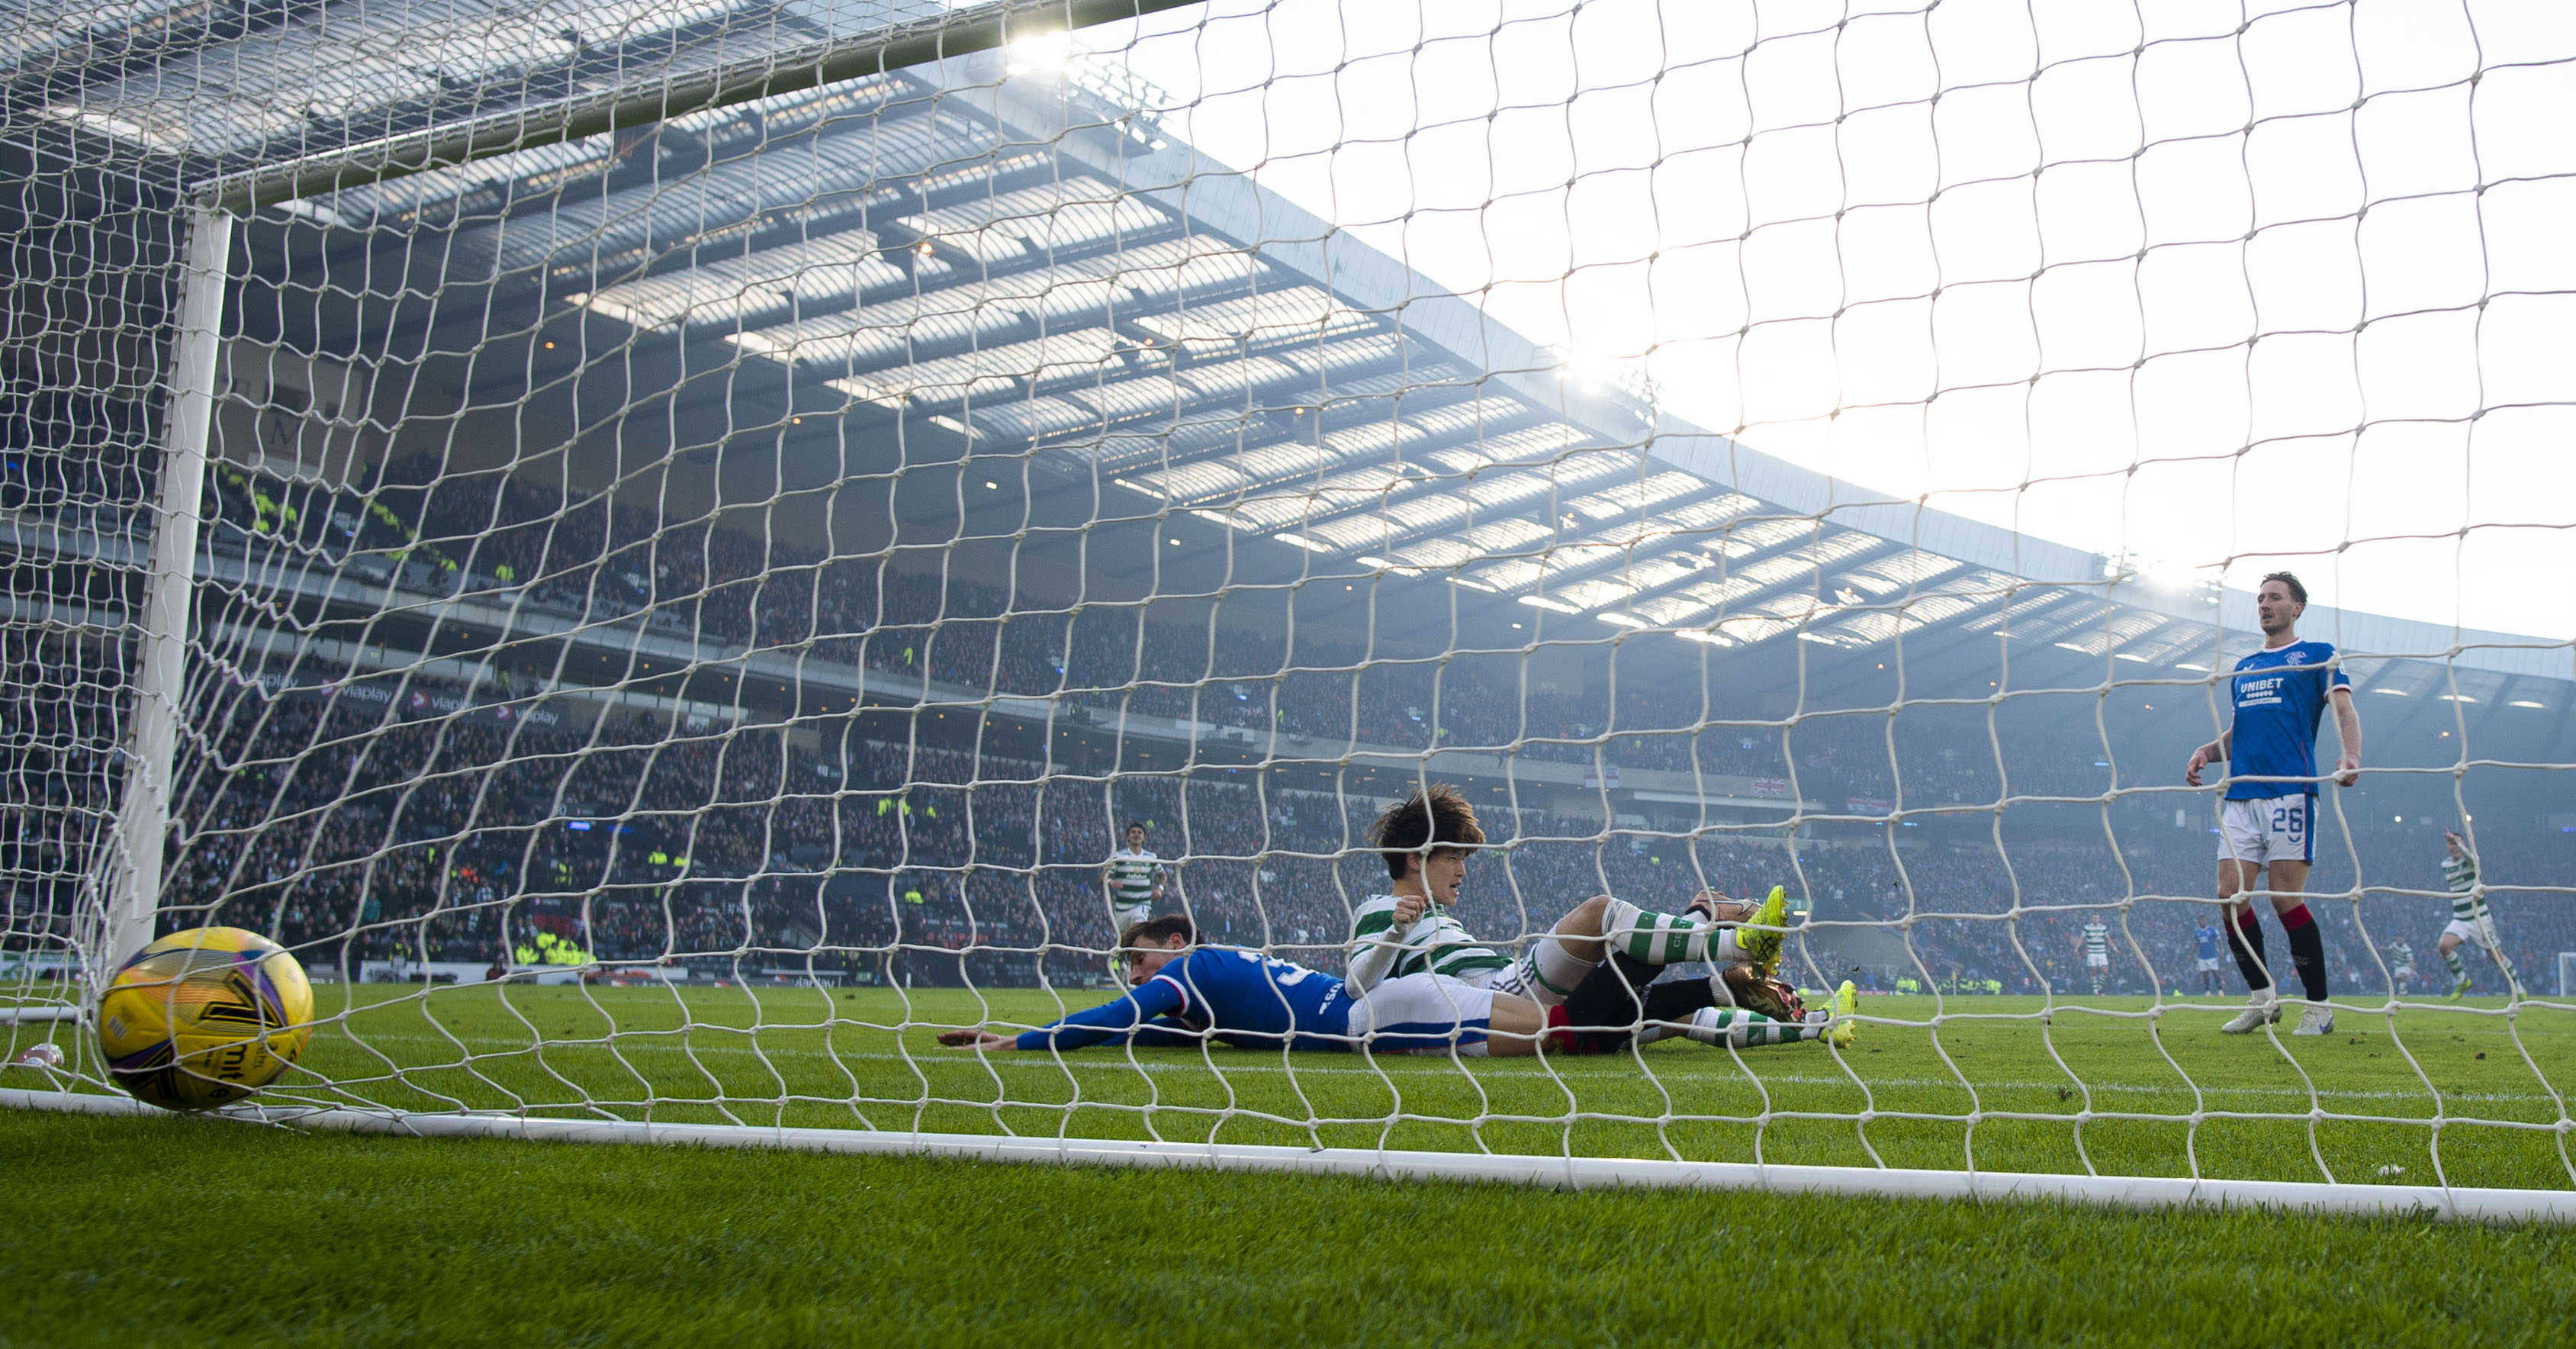 Celtic's Kyogo Furuhashi scores to make it 2-0 during the Viaplay Cup final between Rangers and Celtic at Hampden Park, on February 26, 2023.